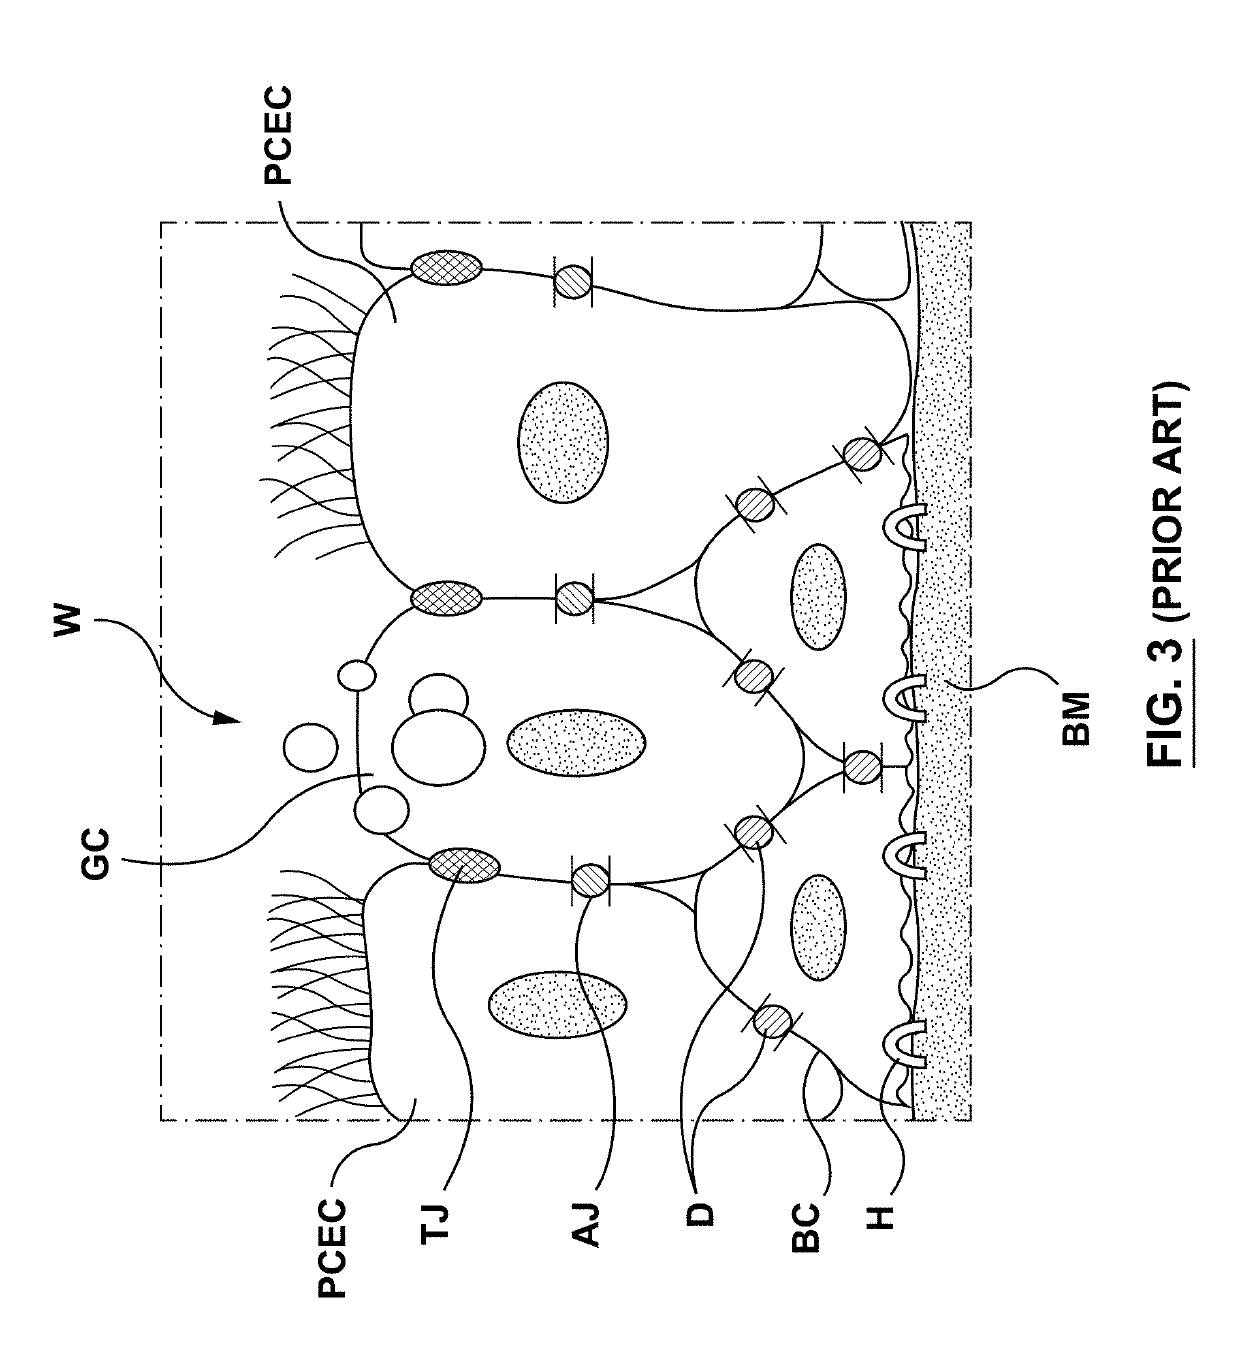 Methods, apparatuses, and systems for the treatment of pulmonary disorders